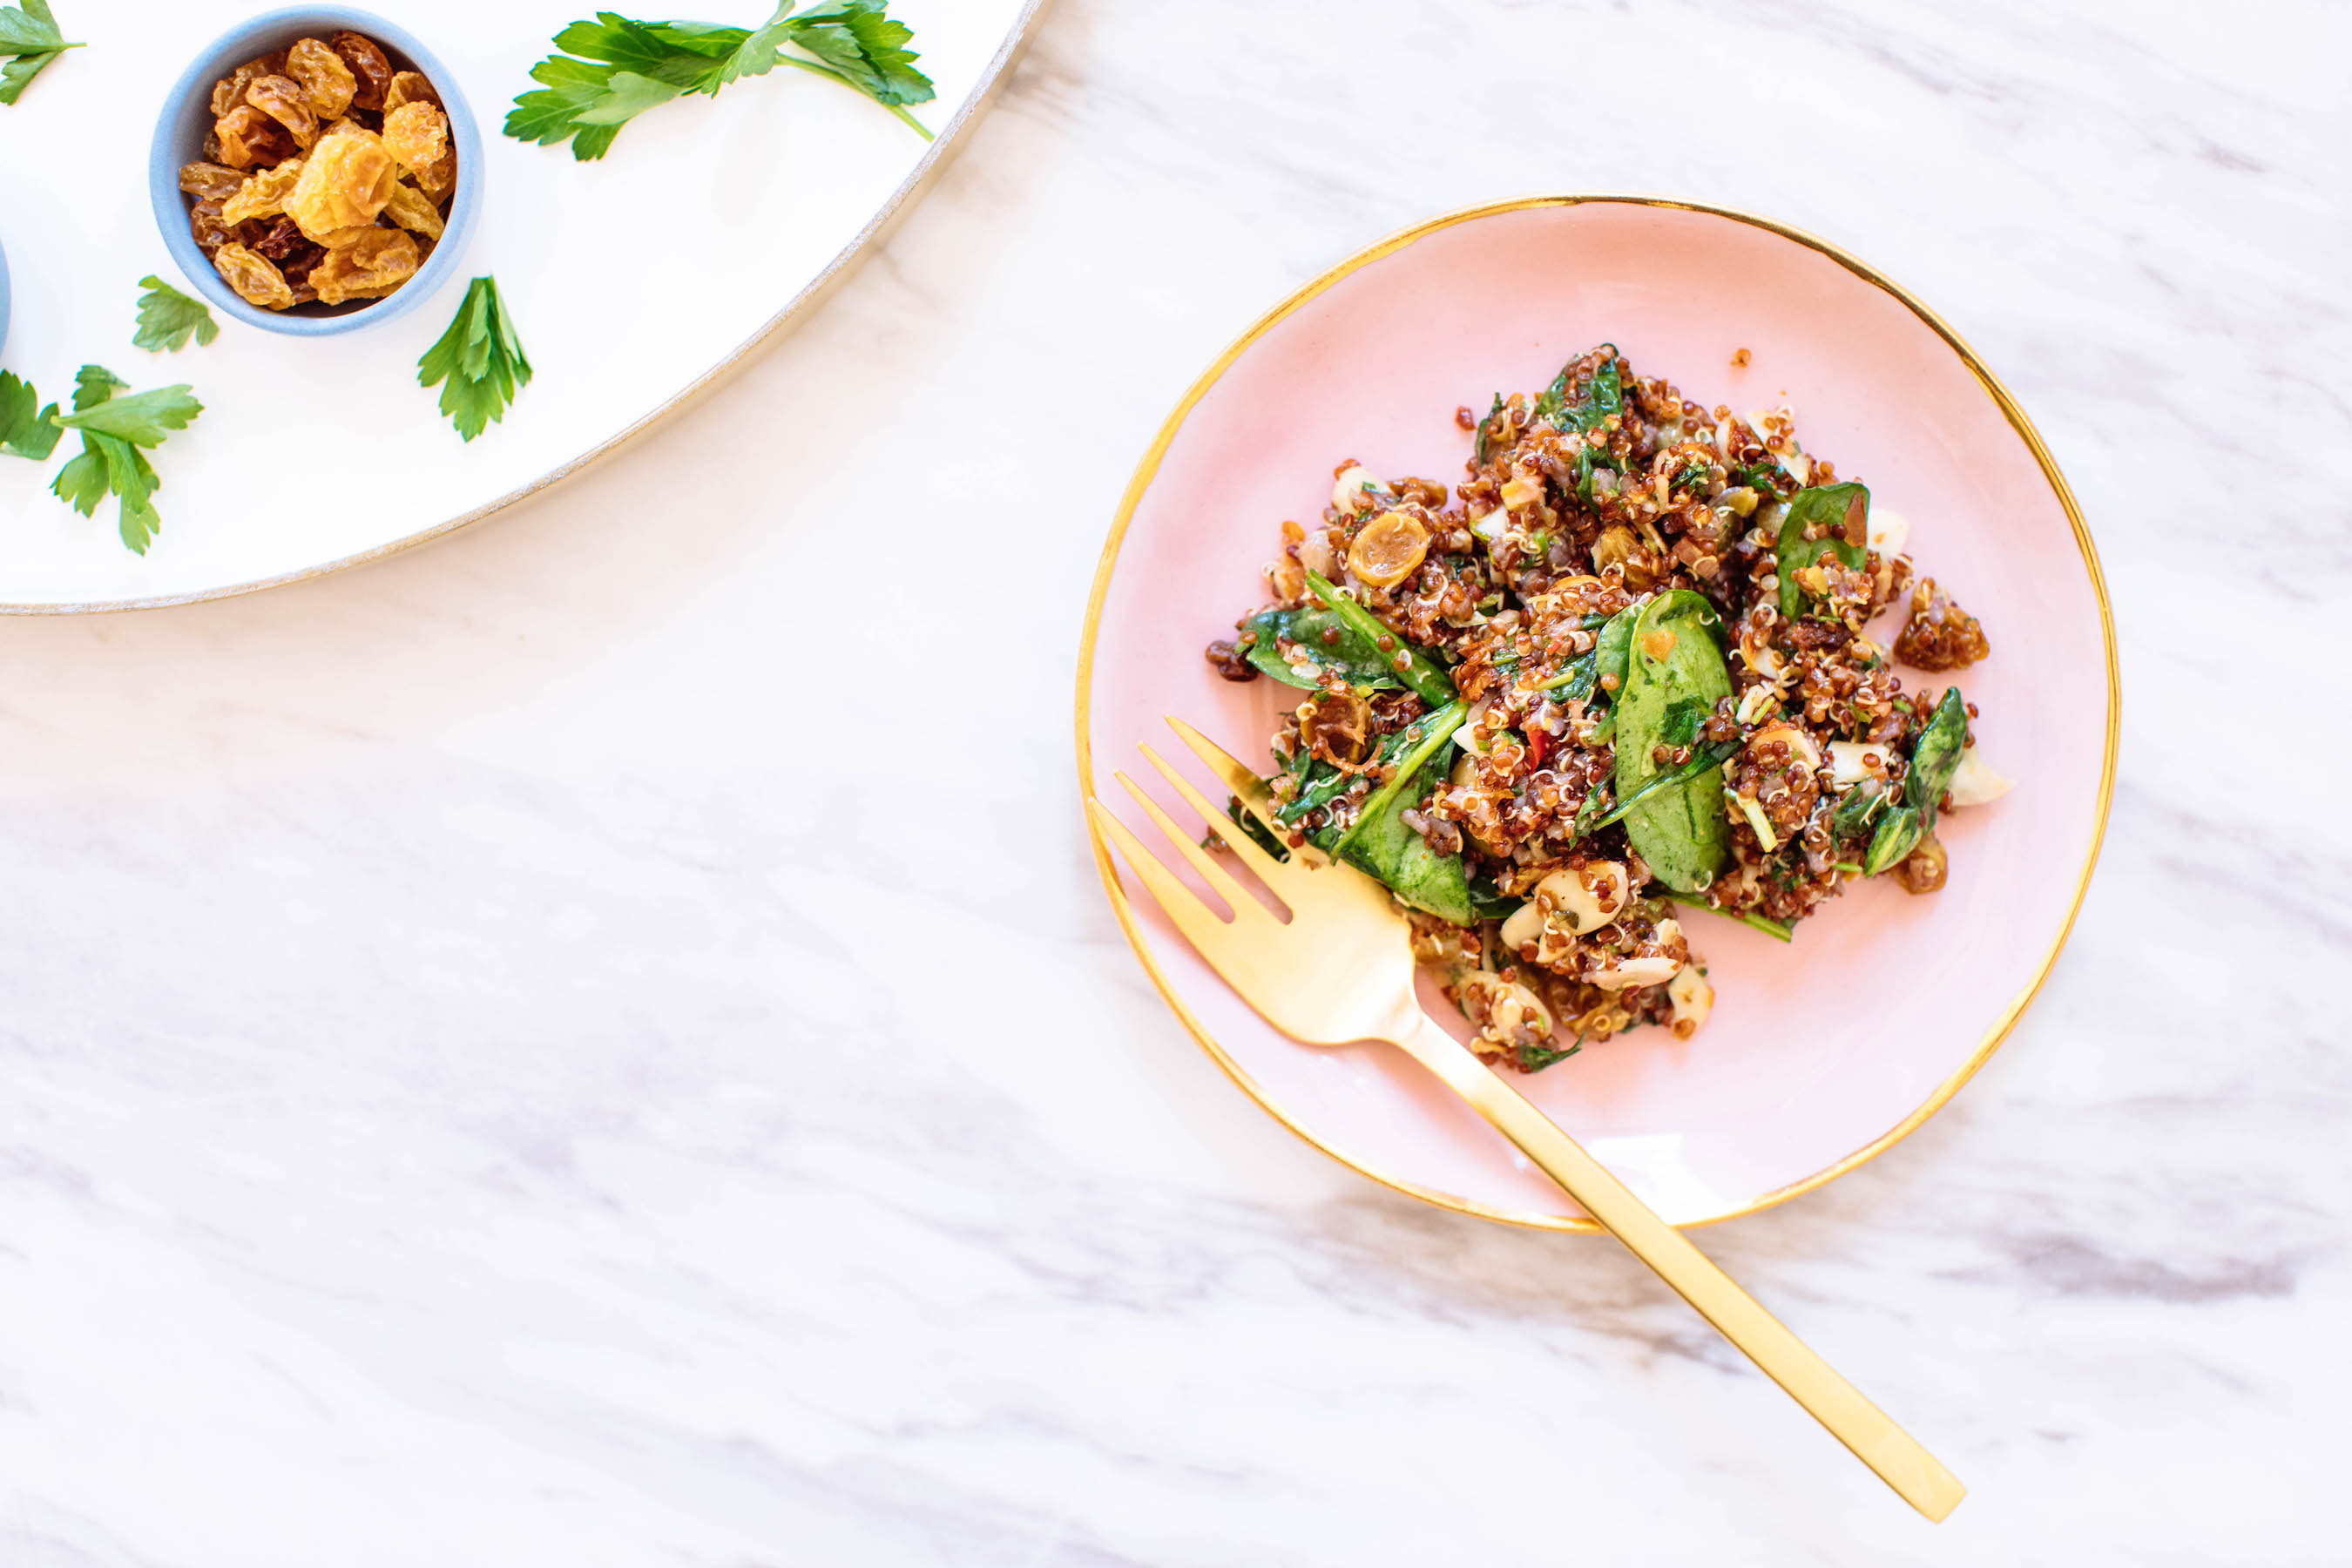 Quinoa Salad with Almonds, Sun-Dried Tomatoes, Olives & More | Nutrition Stripped